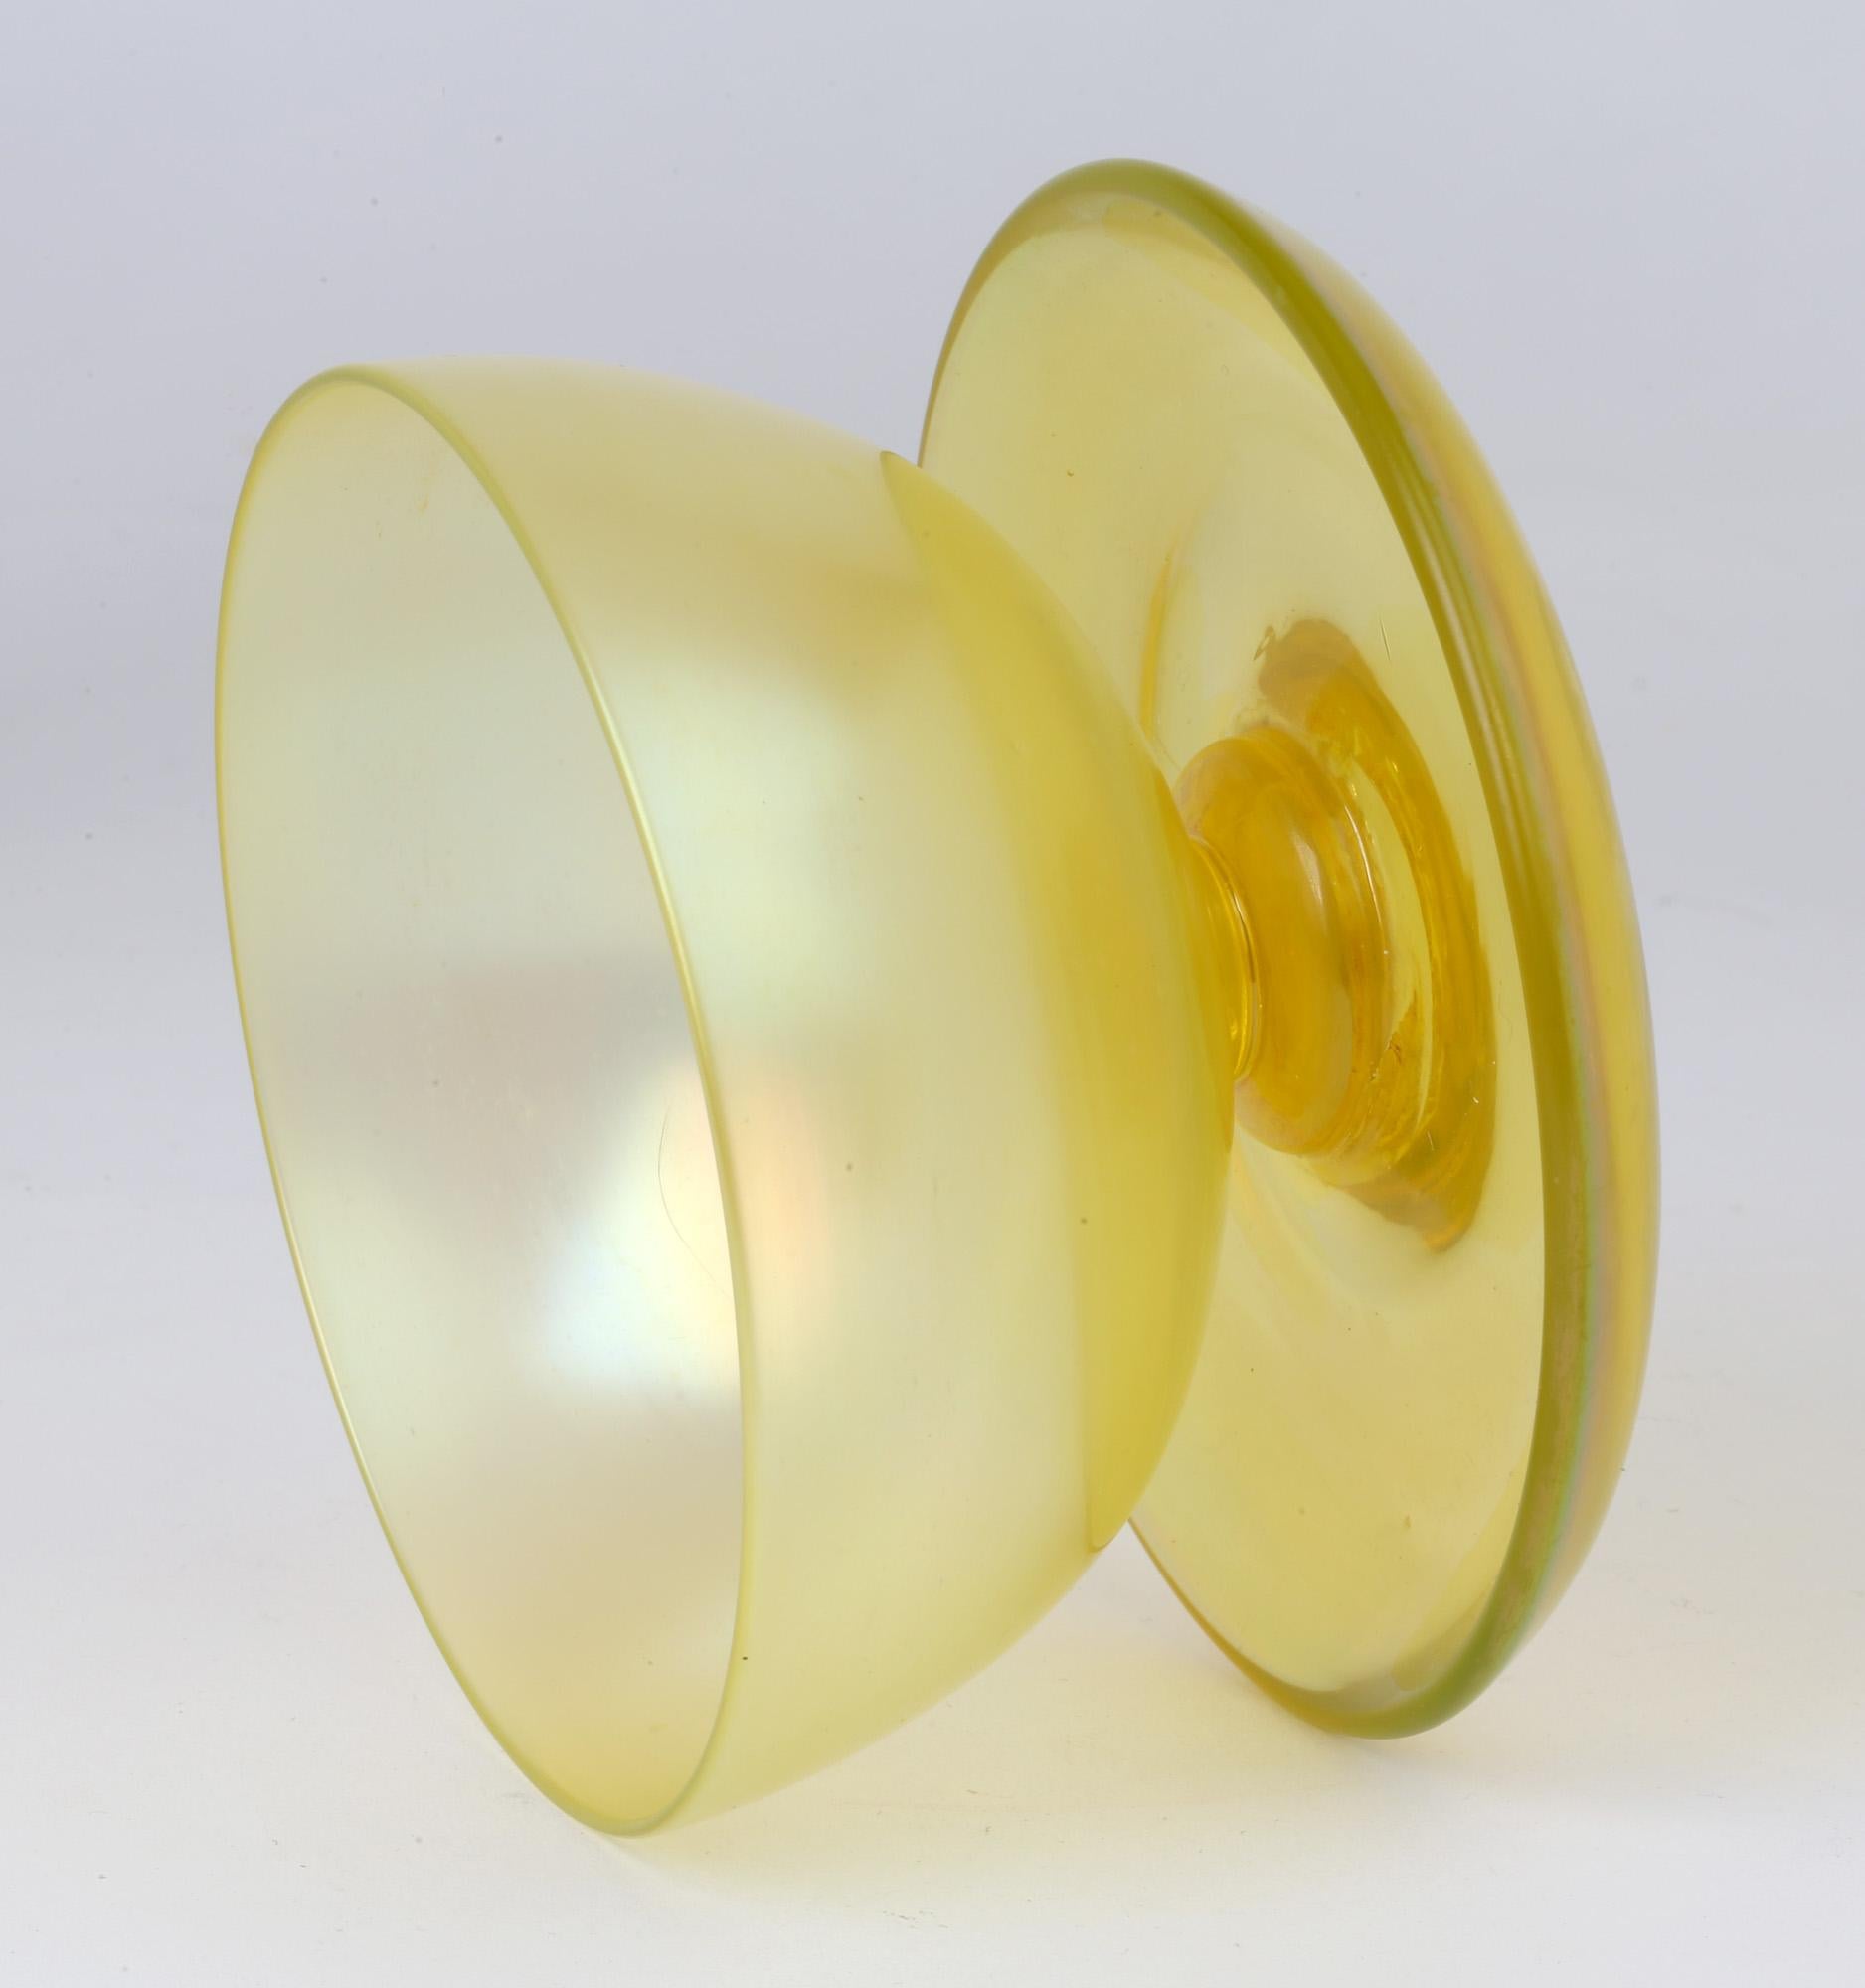 A fine Art Deco John Walsh Walsh iridescent Sunbeam uranium yellow art glass pedestal bowl dating from circa 1929. The open rounded pedestal bowl has a wonderful yellow iridescent finish and is mounted on a thick rounded dish shaped base. The bowl